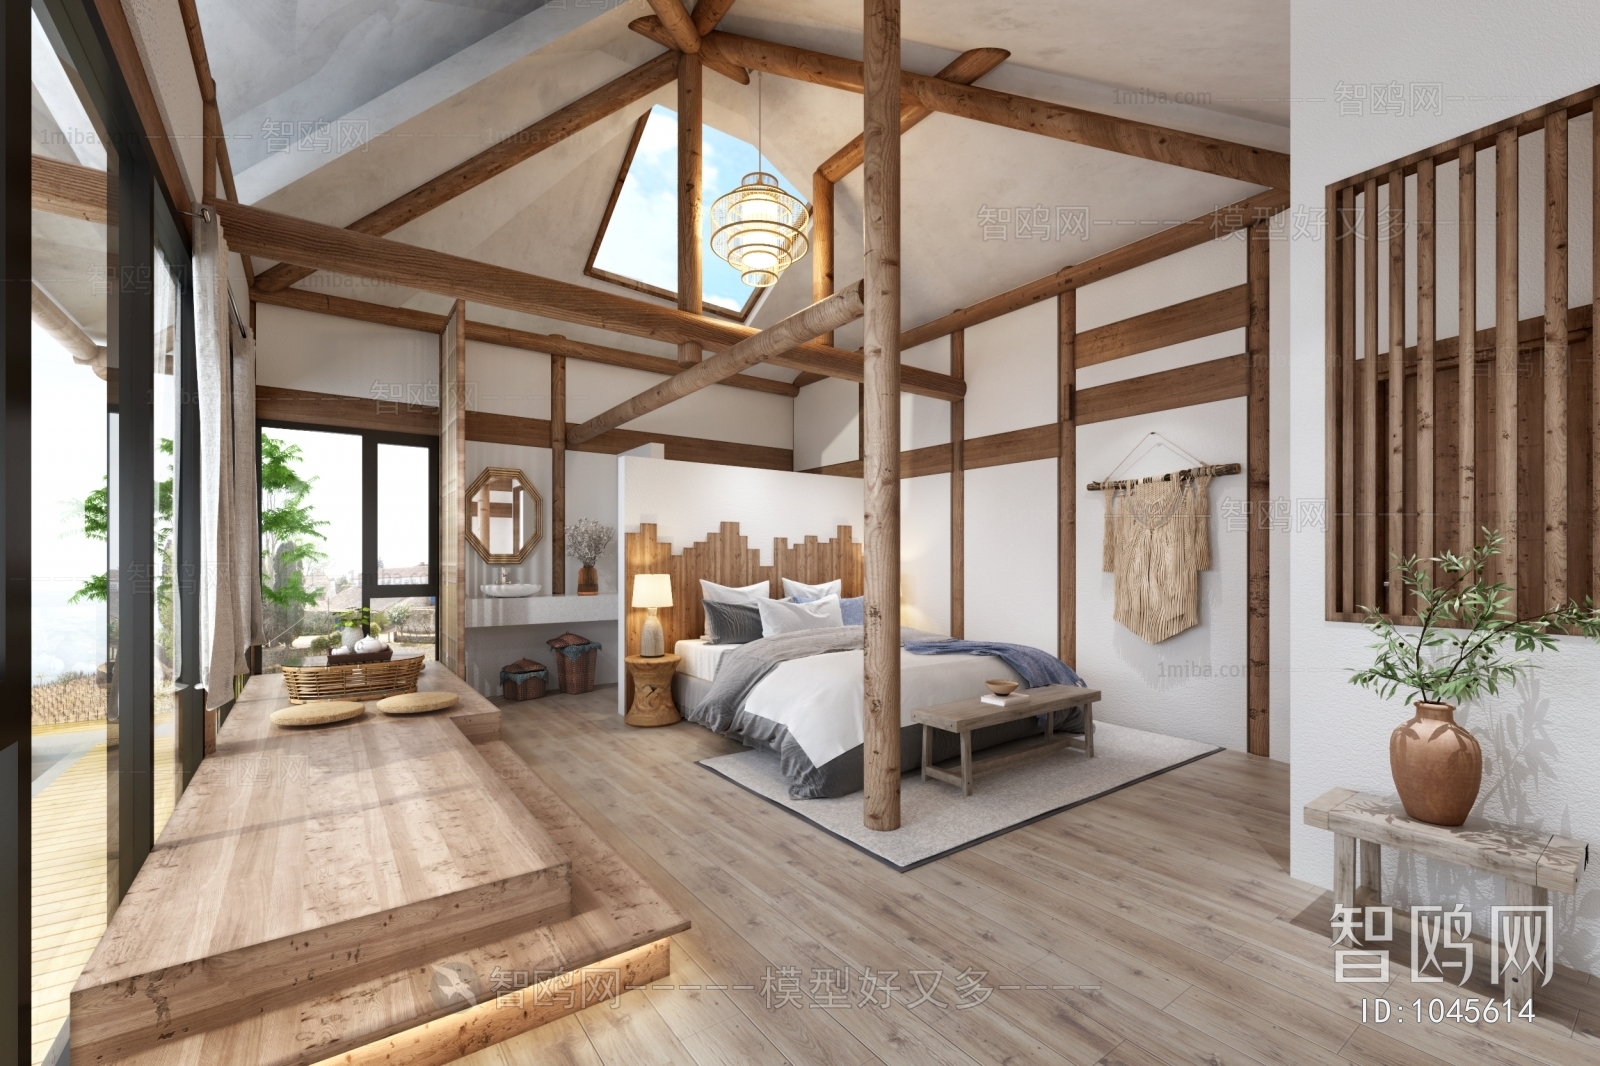 Nordic Style Guest Room